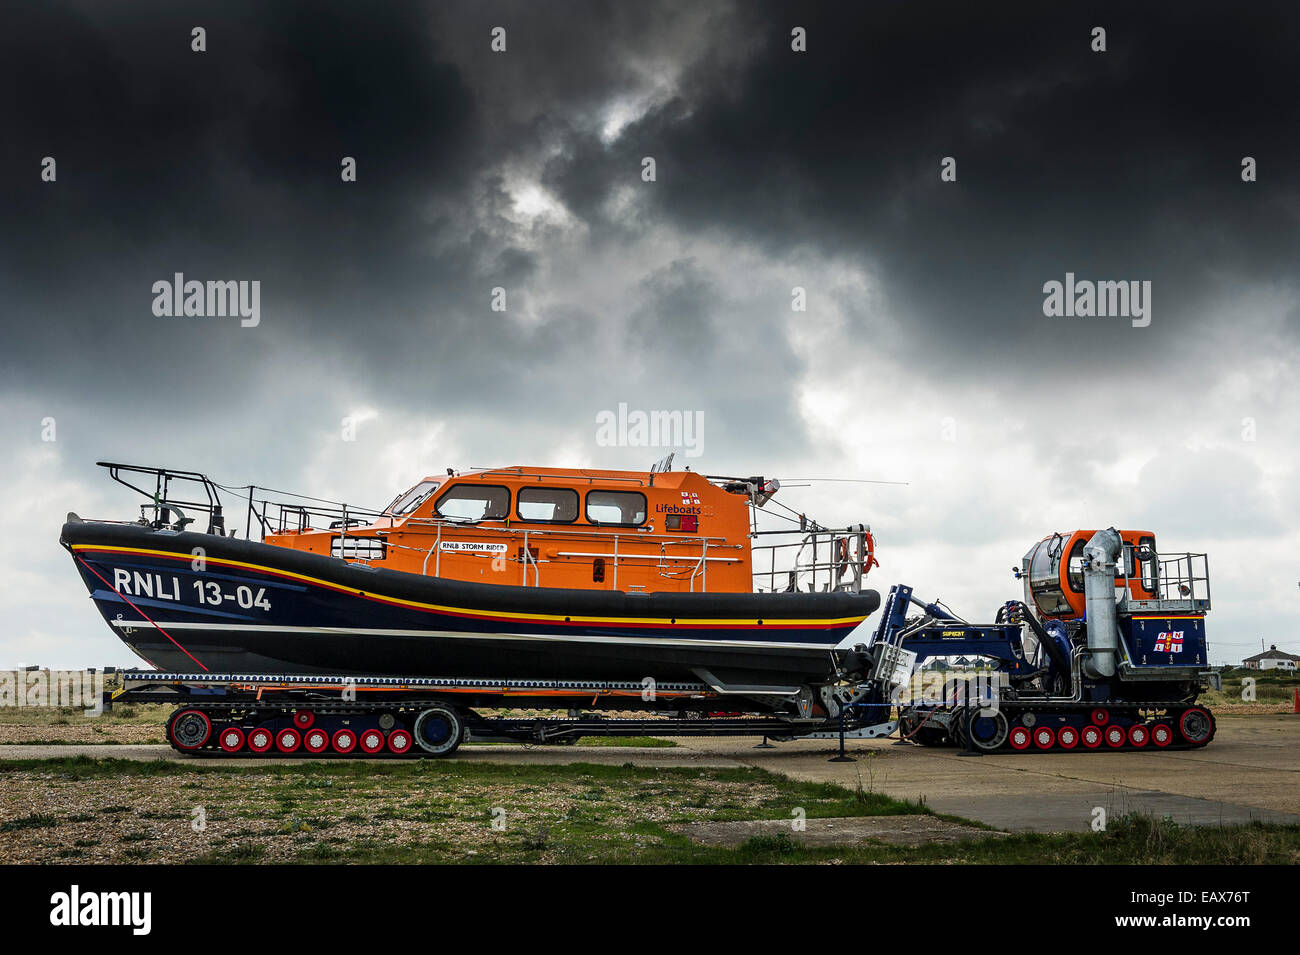 The relief Shannon class Lifeboat 'Storm rider' on a trailer ready to be launched at Dungeness in Kent. Stock Photo